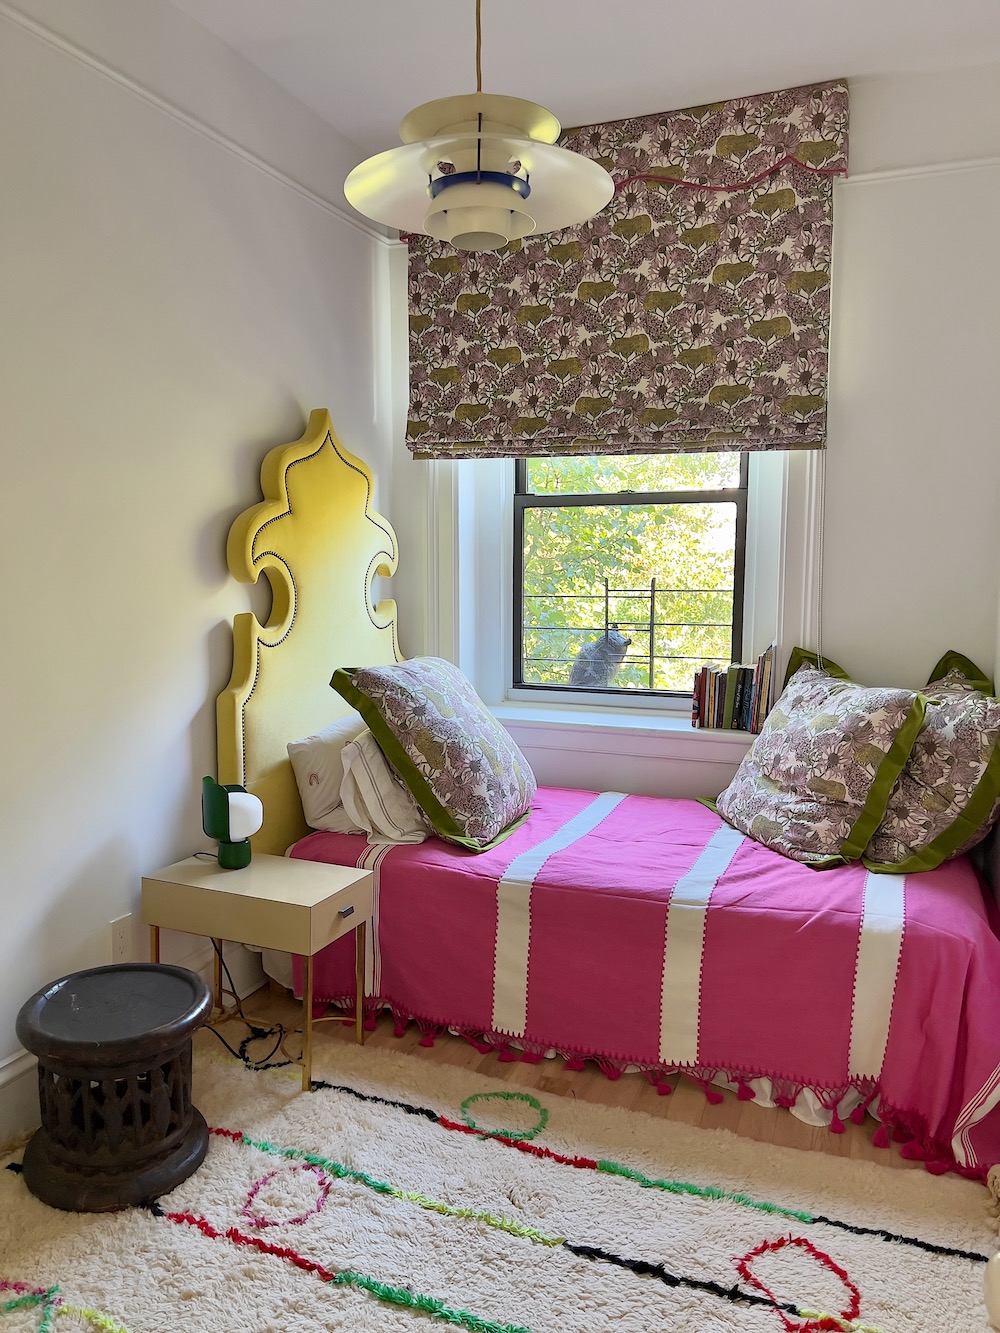 Fawn Galli guest bedroom